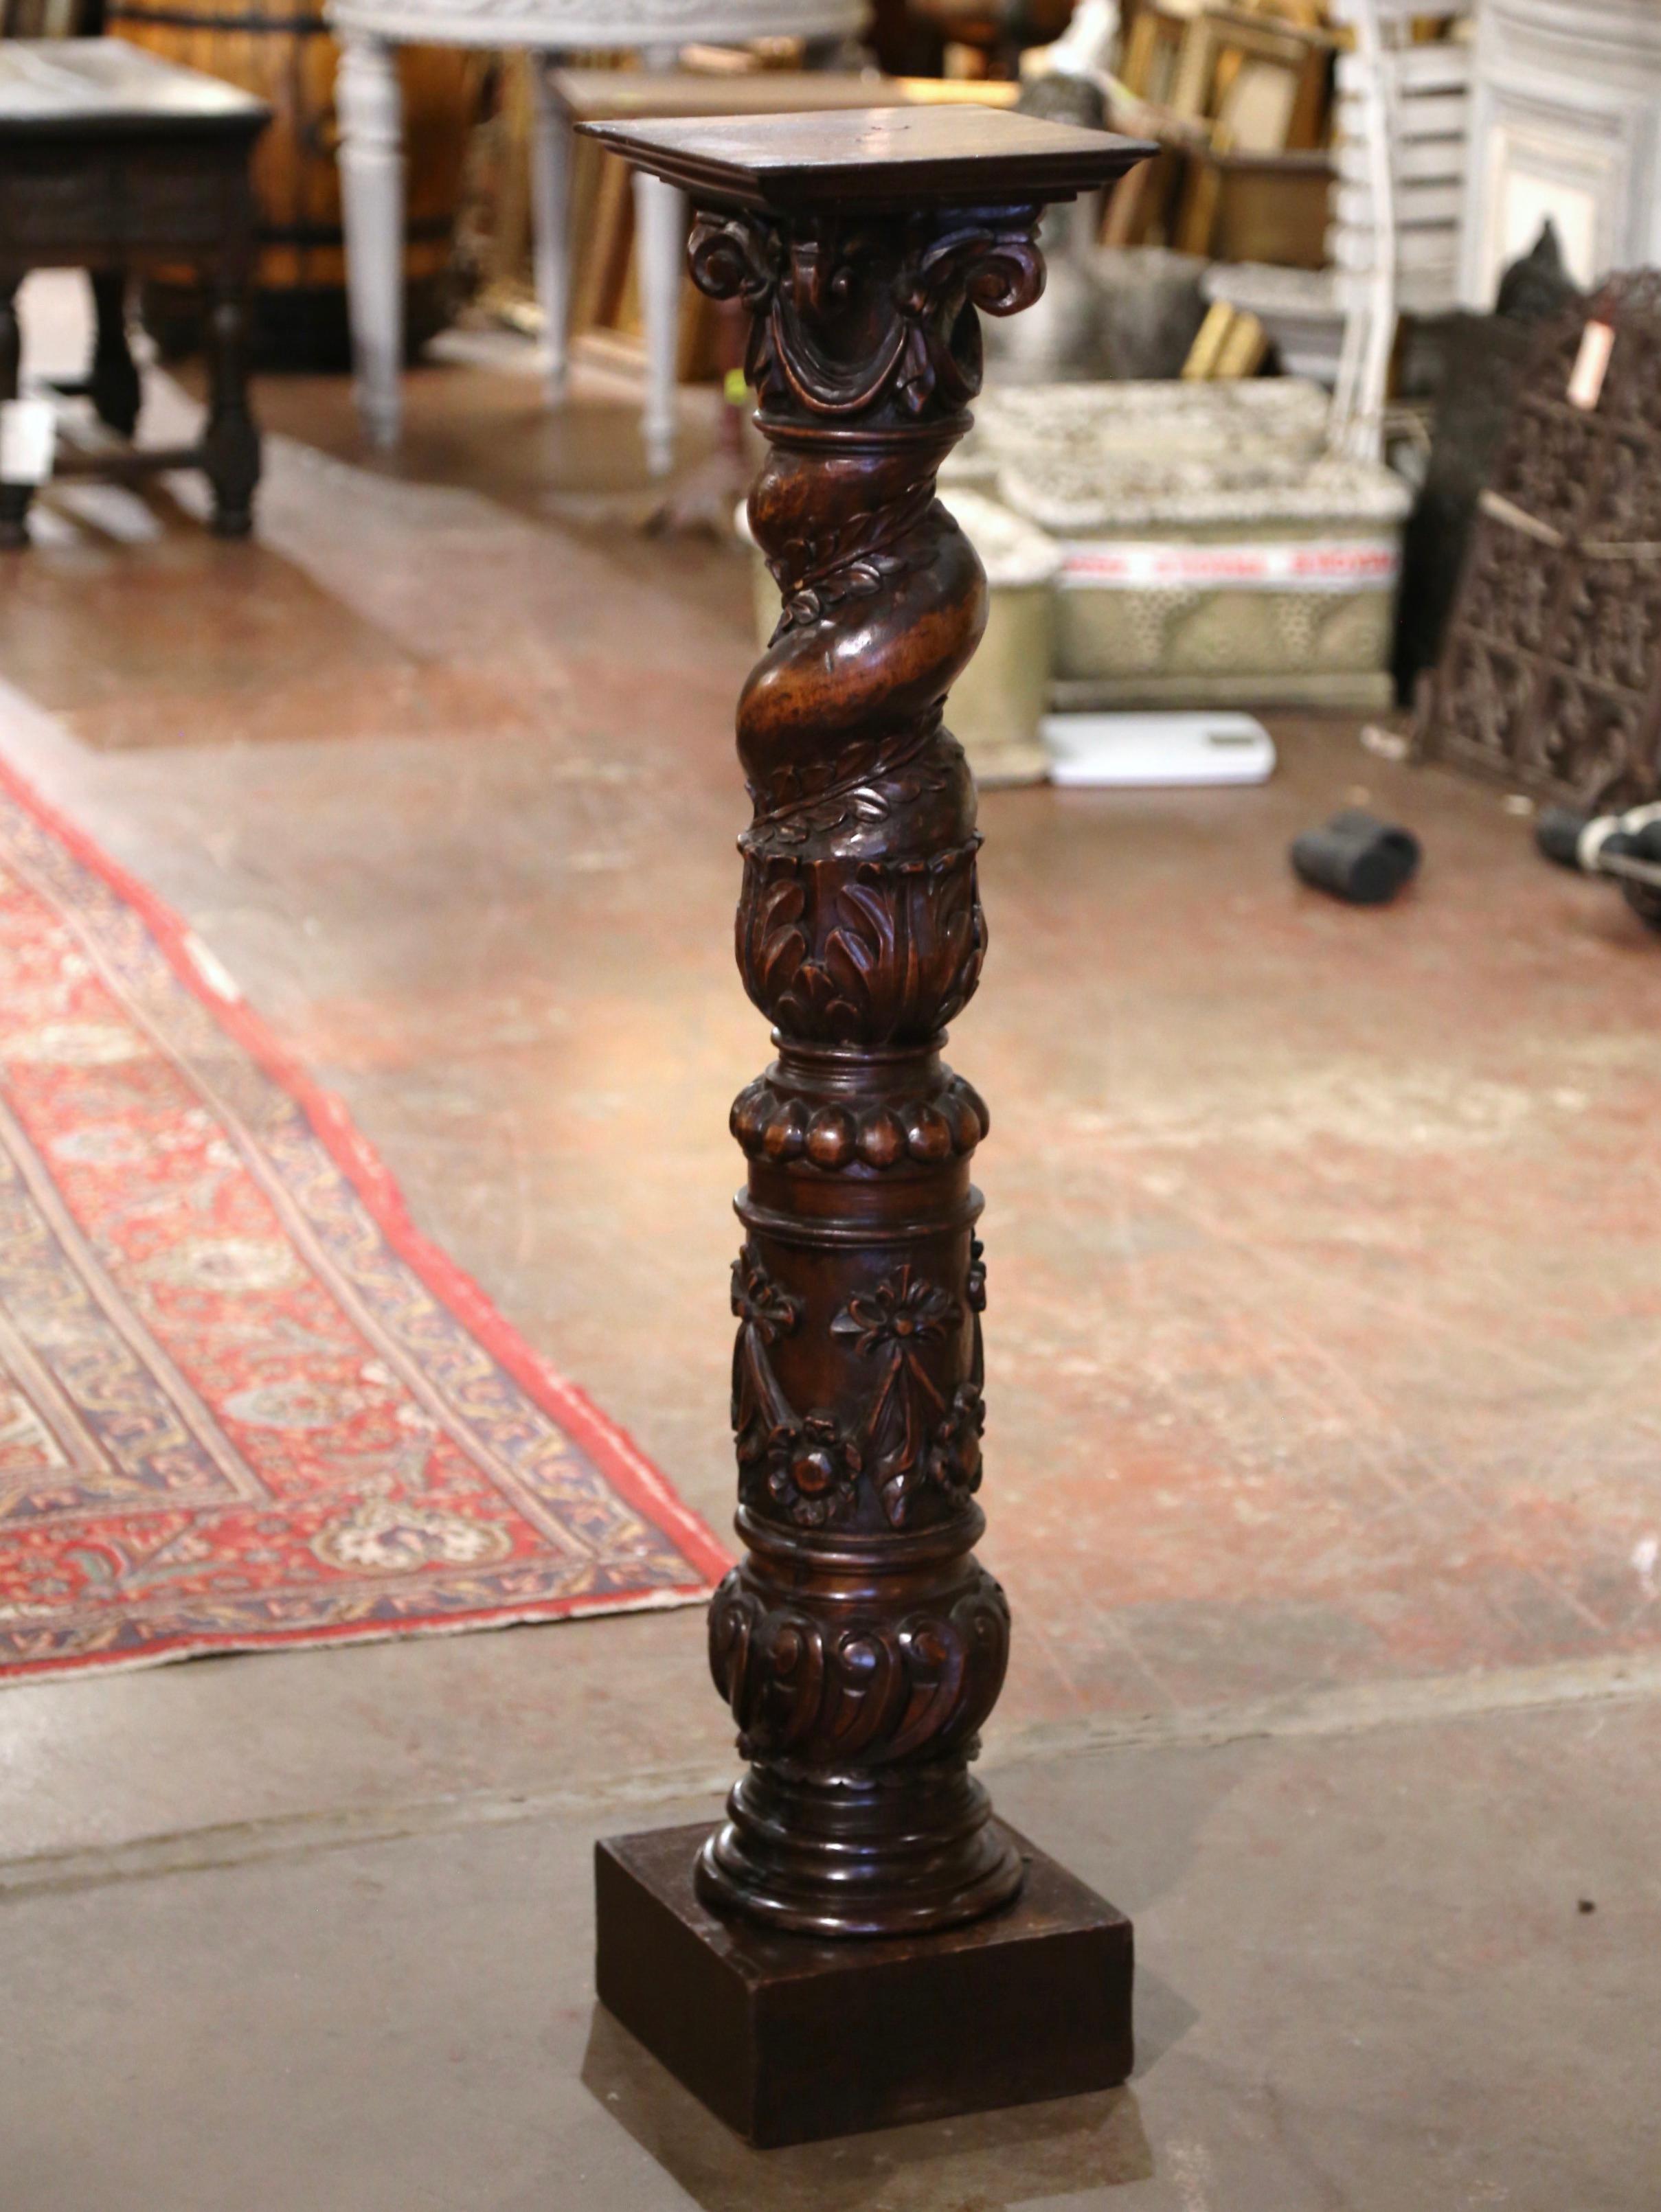 This elegant antique pedestal was crafted in the Burgundy region of France, circa 1870. Built of walnut, the tall column stands on a square plinth base over a circular, barley twist and turned stem, decorated with hand carved laurel leaf, foliage,